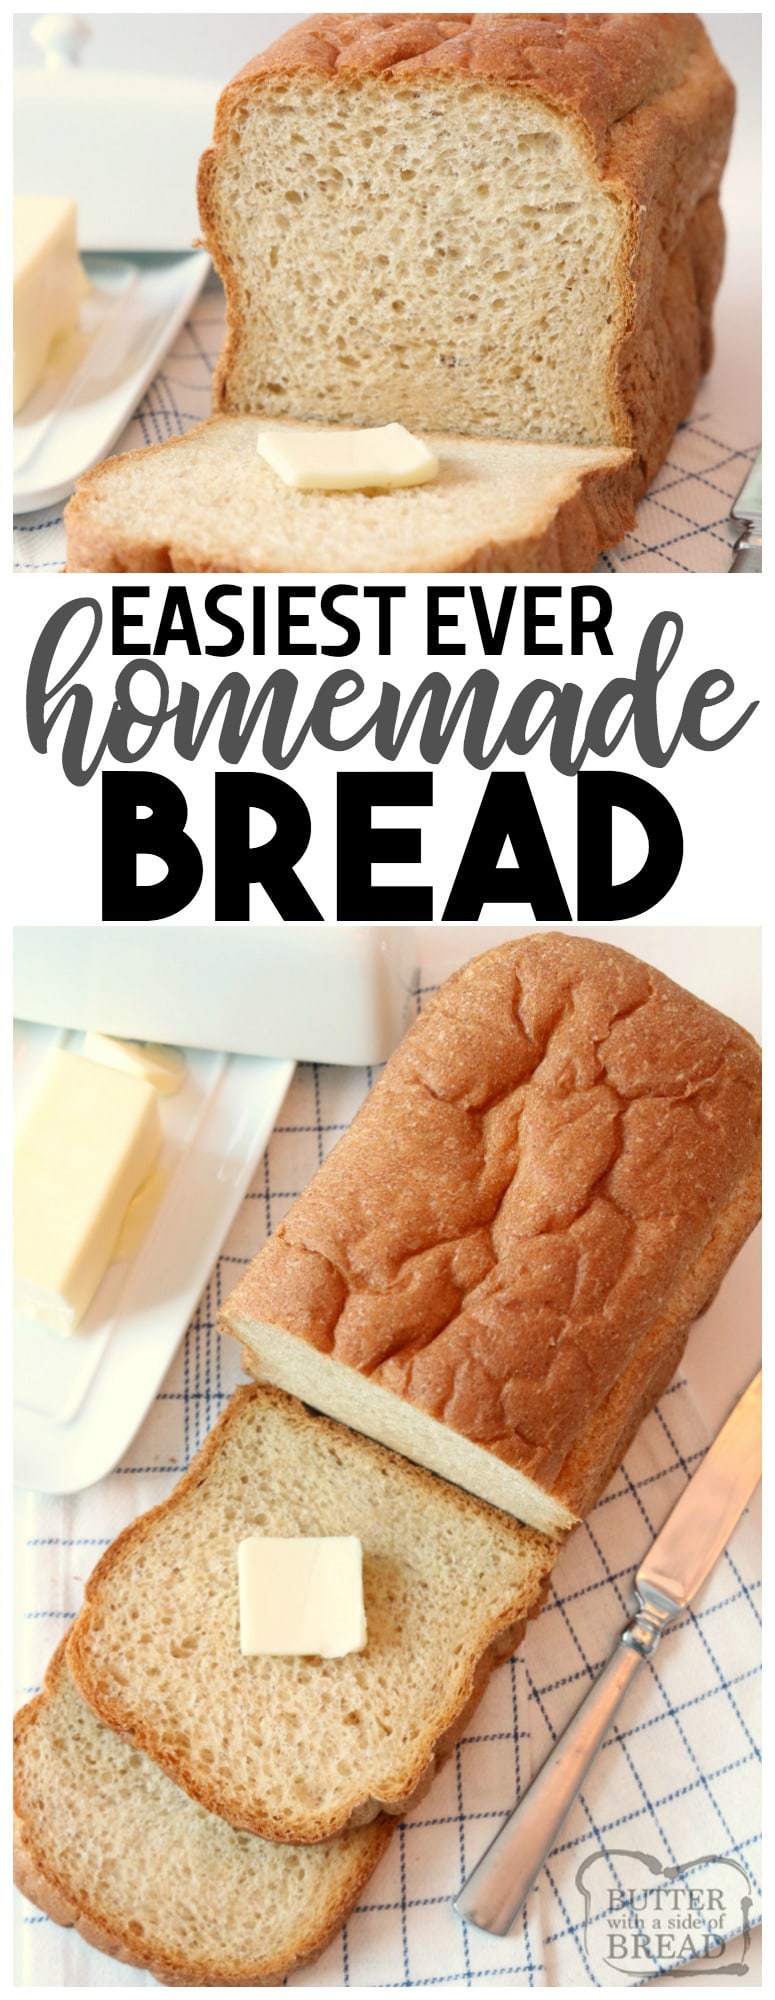 Homemade Bread made easy with simple ingredients & detailed instructions with photos. Make our best homemade #bread #recipe and enjoy the great flavor & texture! Best ever #homemade Bread #whitebread #wheatbread and YES you can make it in a Bread machine! Butter With A Side of Bread